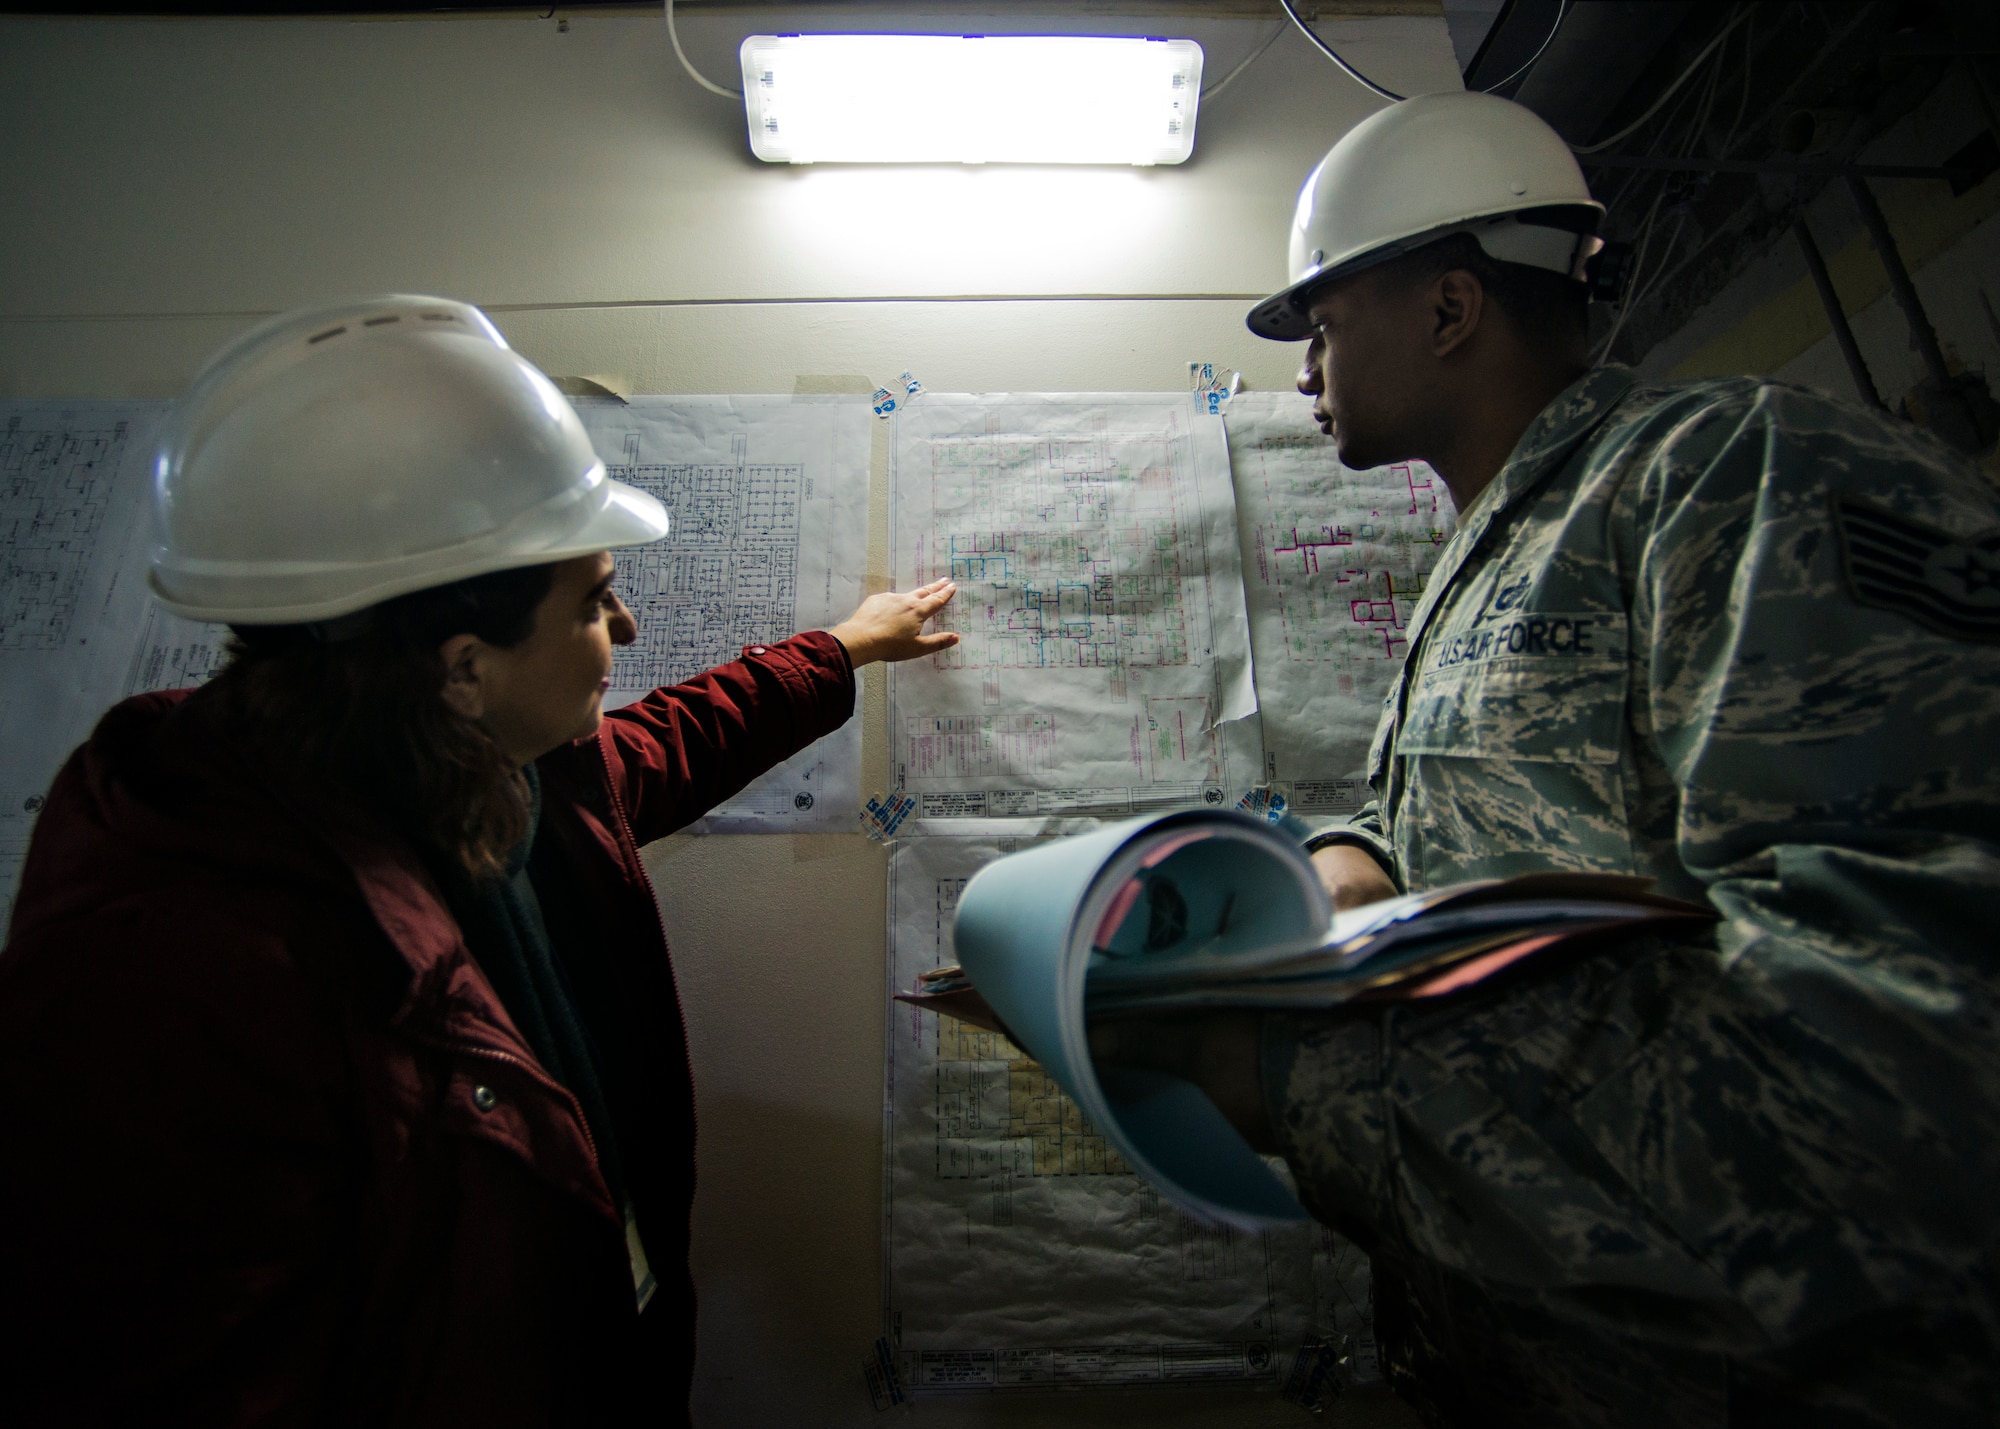 Tech. Sgt. Nicholas Northam, 39th Contracting Squadron NCO in charge of base infrastructure, reviews a blueprint during a site visit Jan. 8, 2015, at Incirlik Air Base, Turkey. The 39th CONS has strict principles and practices that must be followed before presenting any contract. (U.S. Air Force photo by Airman Cory W. Bush/Released)